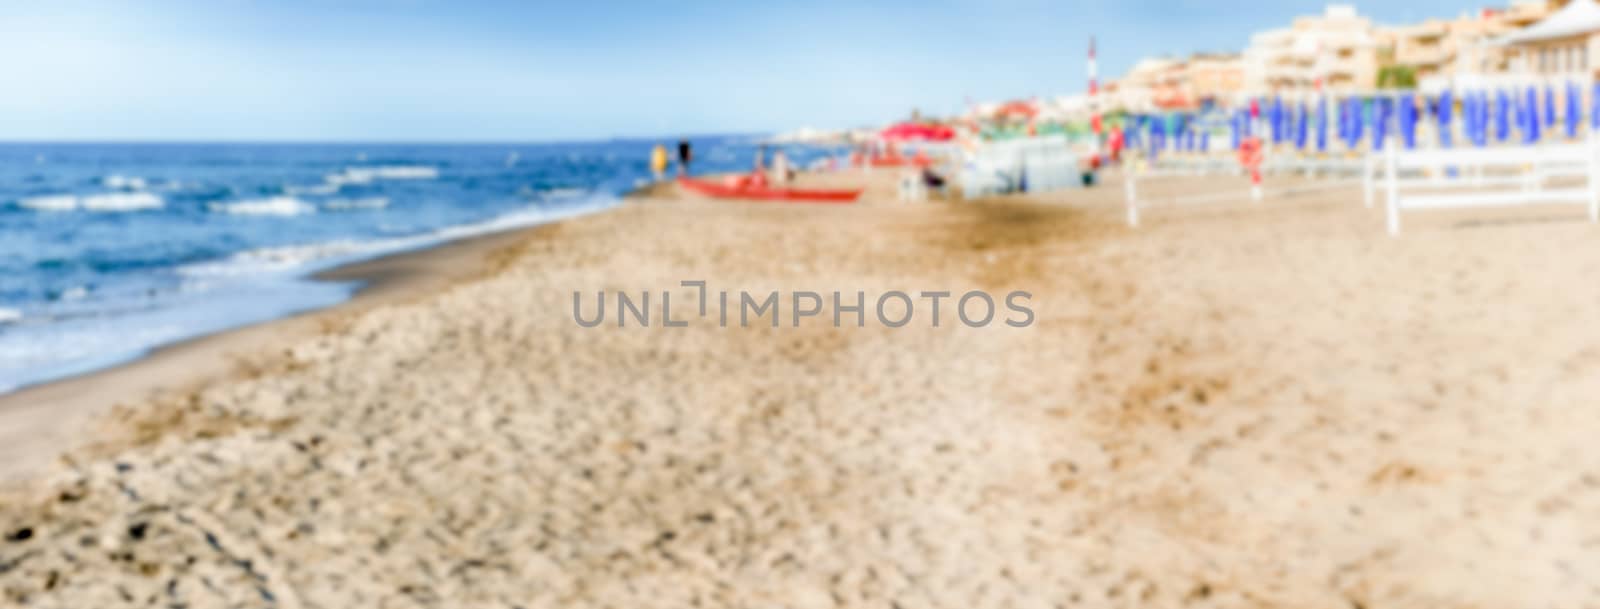 Defocused background of a scenic beach in central Italy by marcorubino